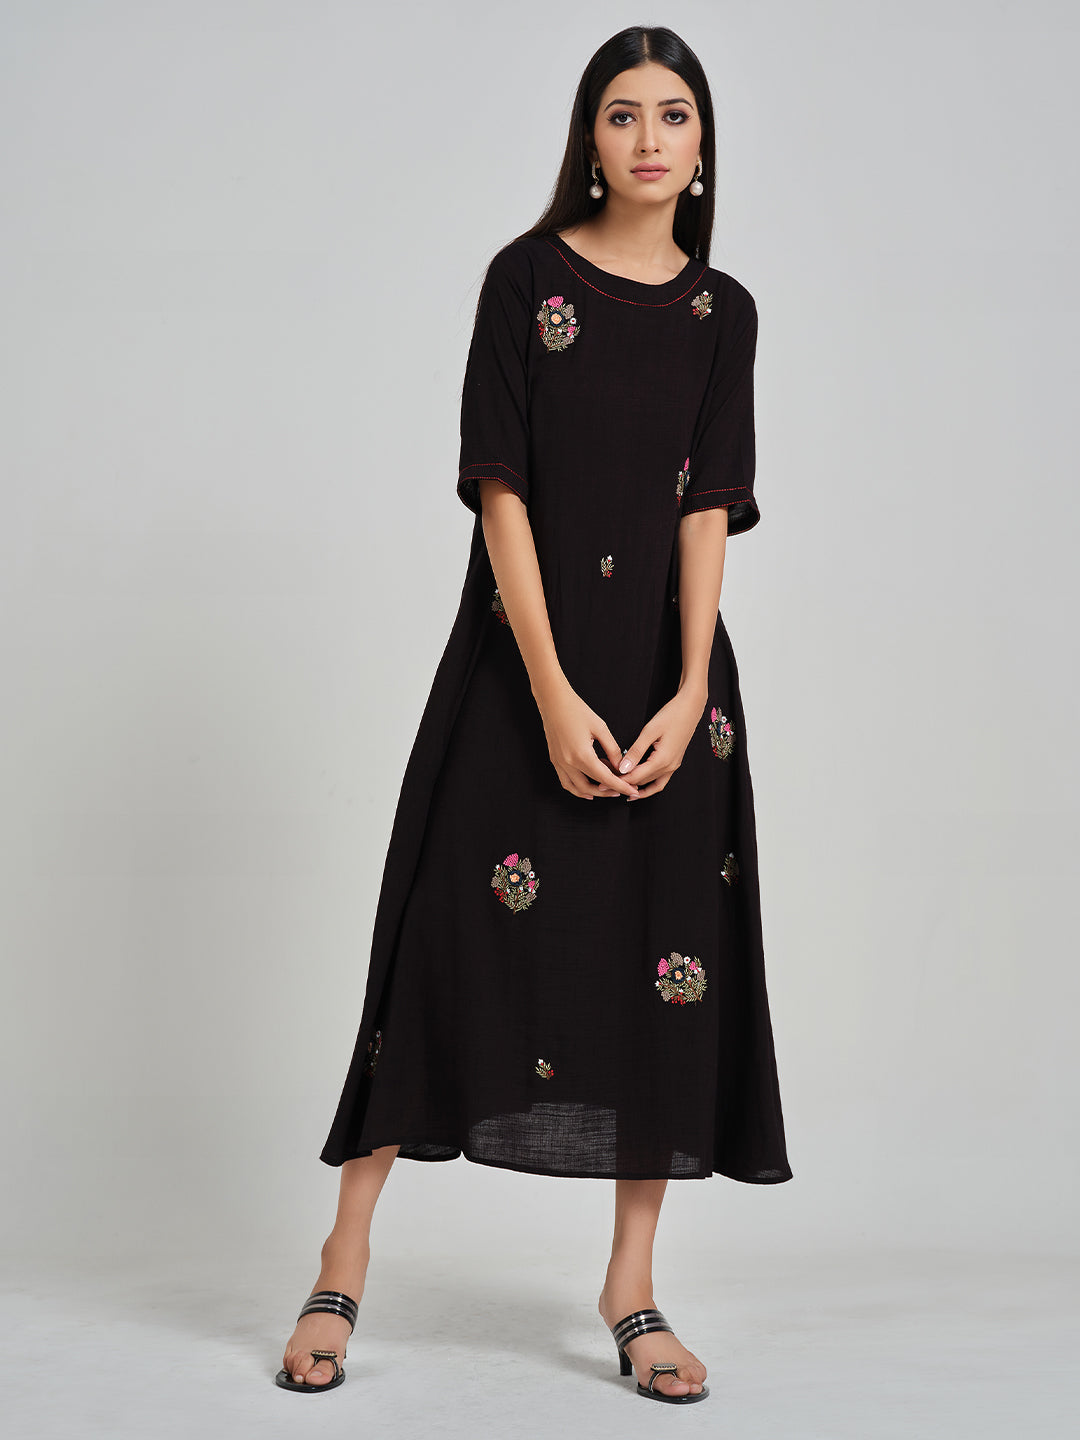 Black Embroidered A-Line Dress - ARH694